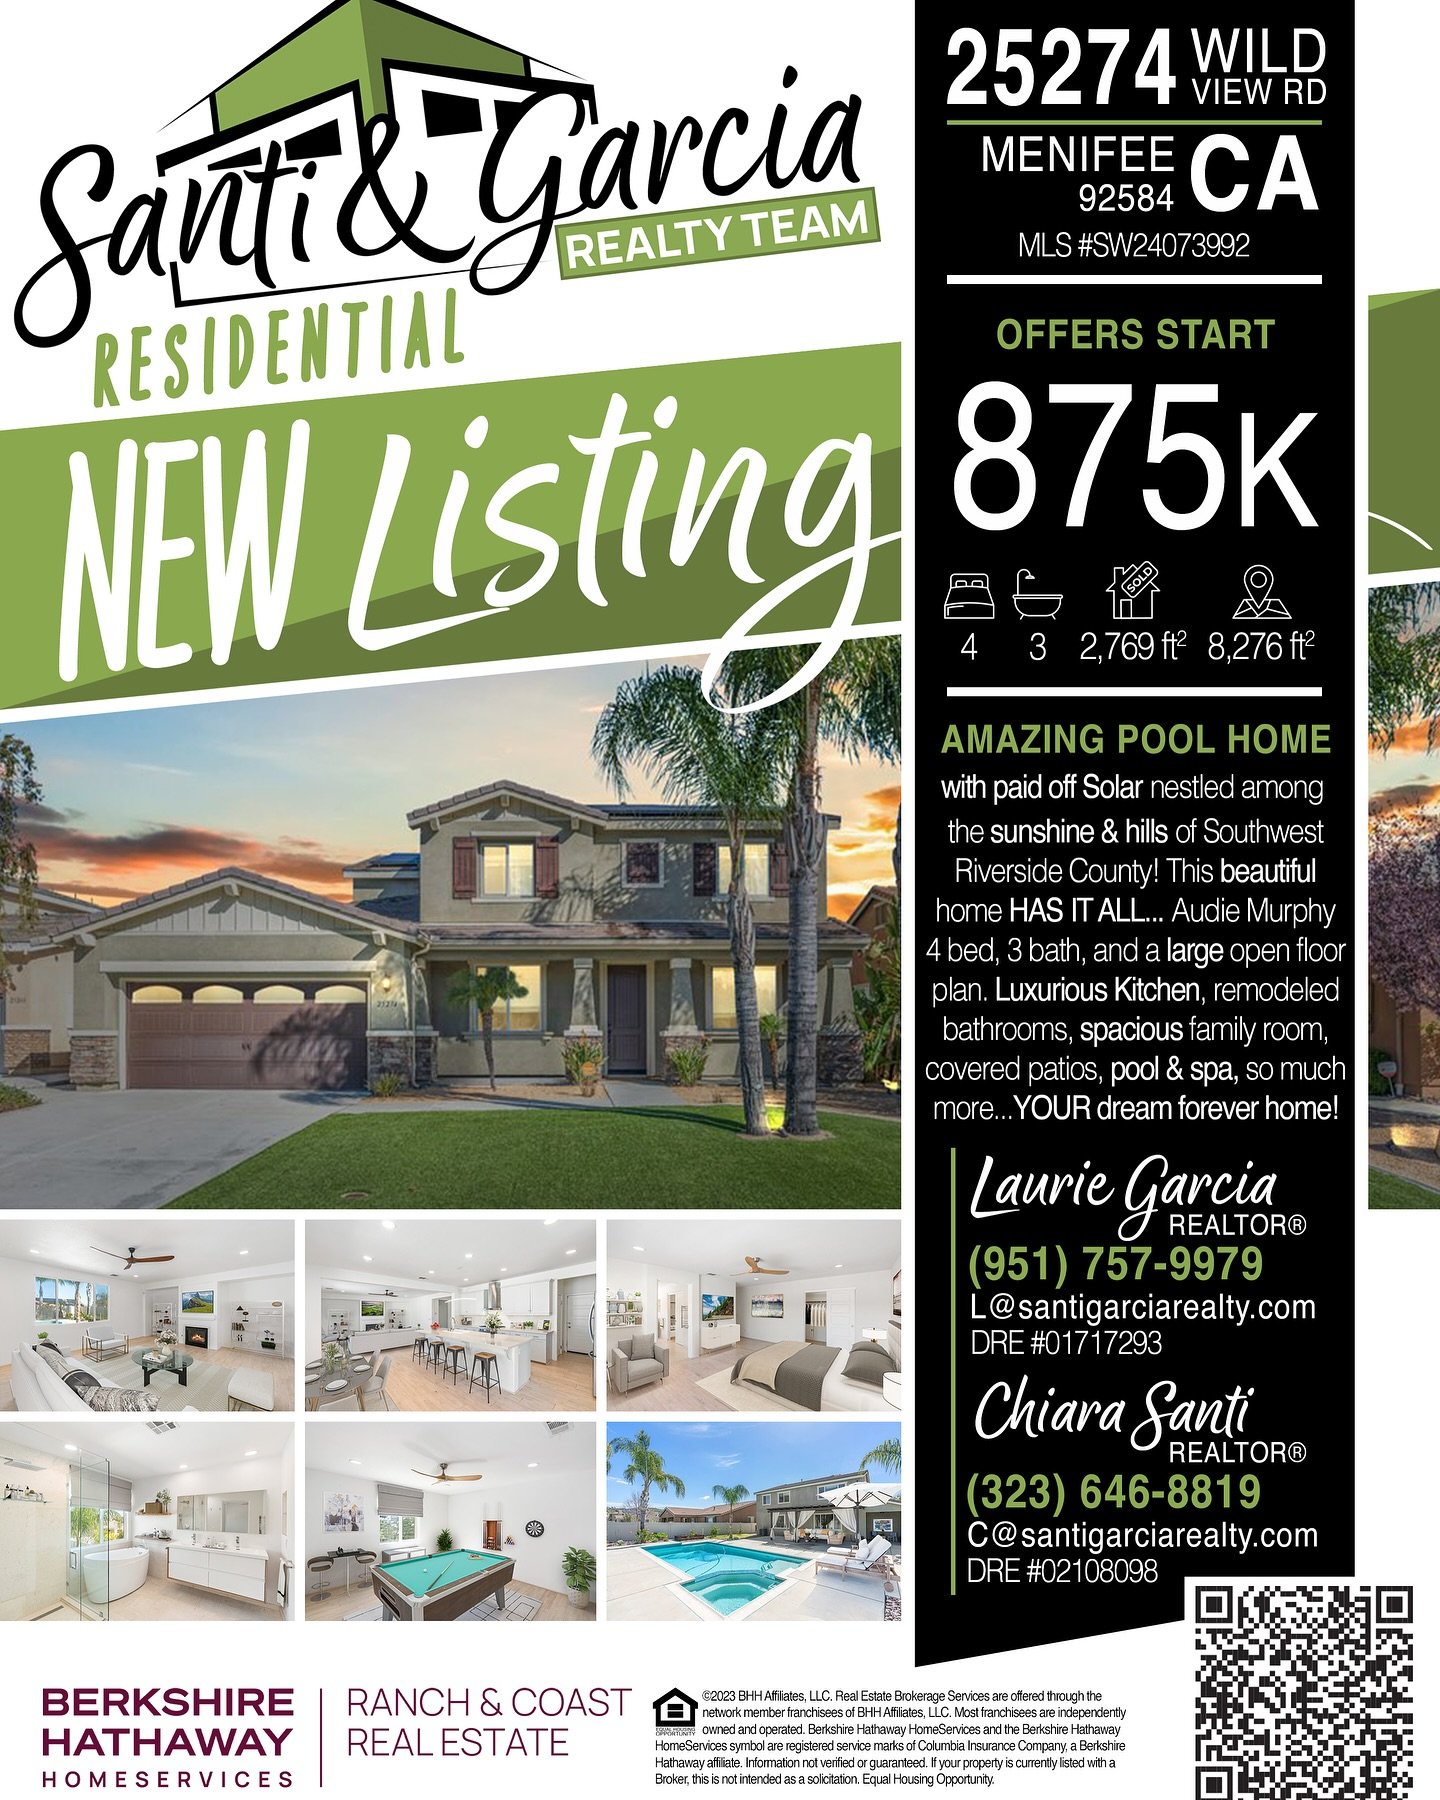 🏡FOR SALE‼️

📍25274 Wild View Rd, Menifee, CA 92584

👉More info at santigarciarealty.com

#SantiGarciaRealty #realestate #realtor #realty #carealestategroup